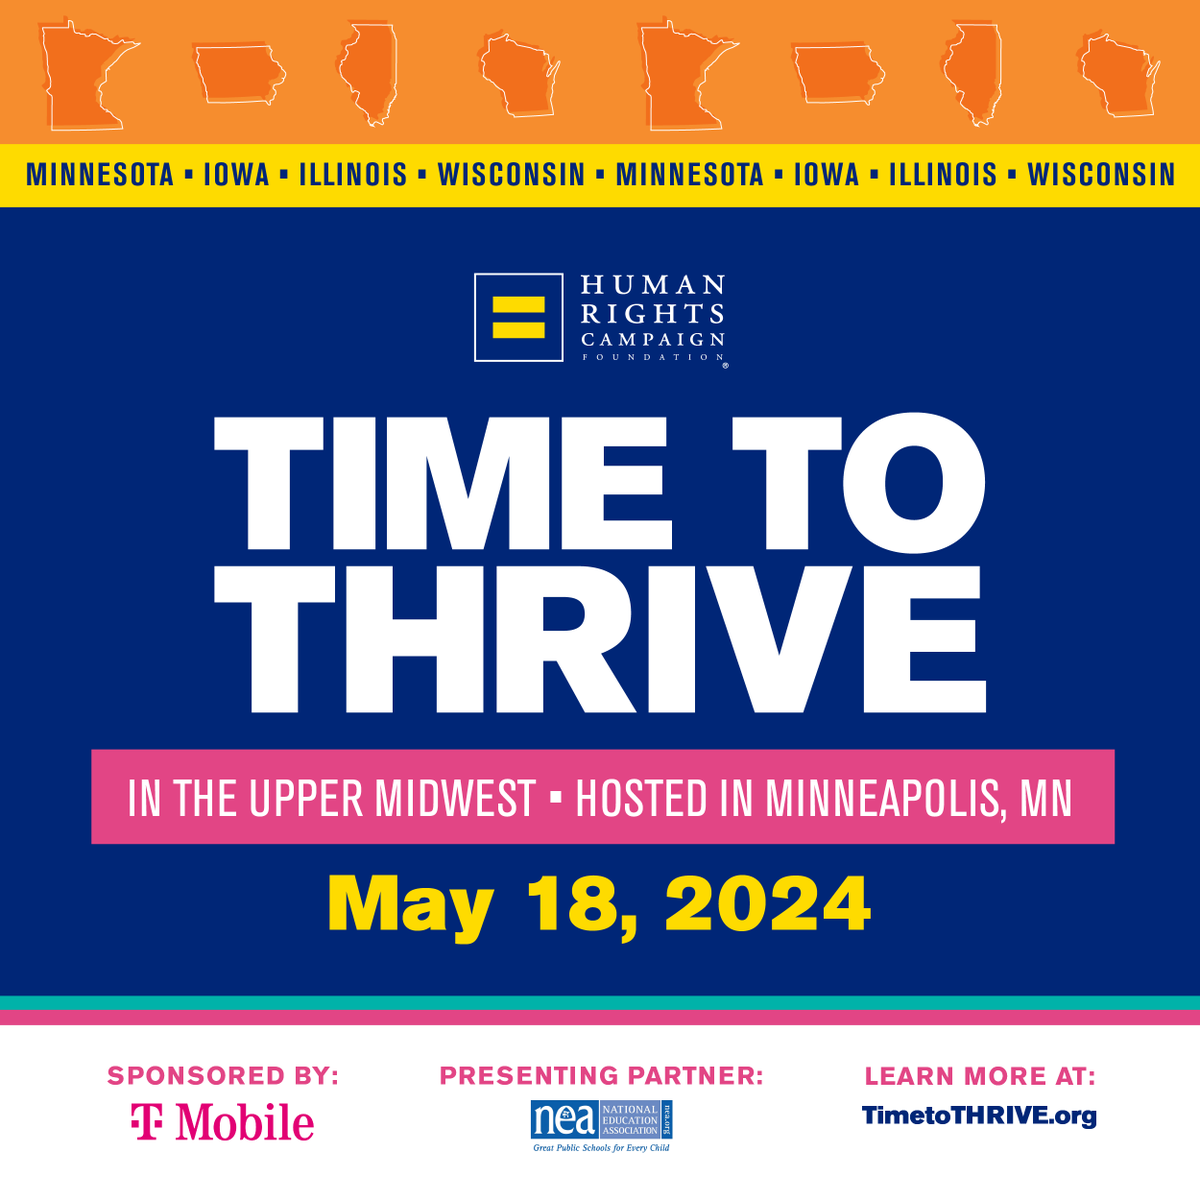 Fair Wisconsin is proud to partner with @humanrightscampaign for the Time to Thrive Summit this May! We believe that equipping our schools and educators with the tools they need to advocate for our queer and trans youth is incredibly important. (1/2)